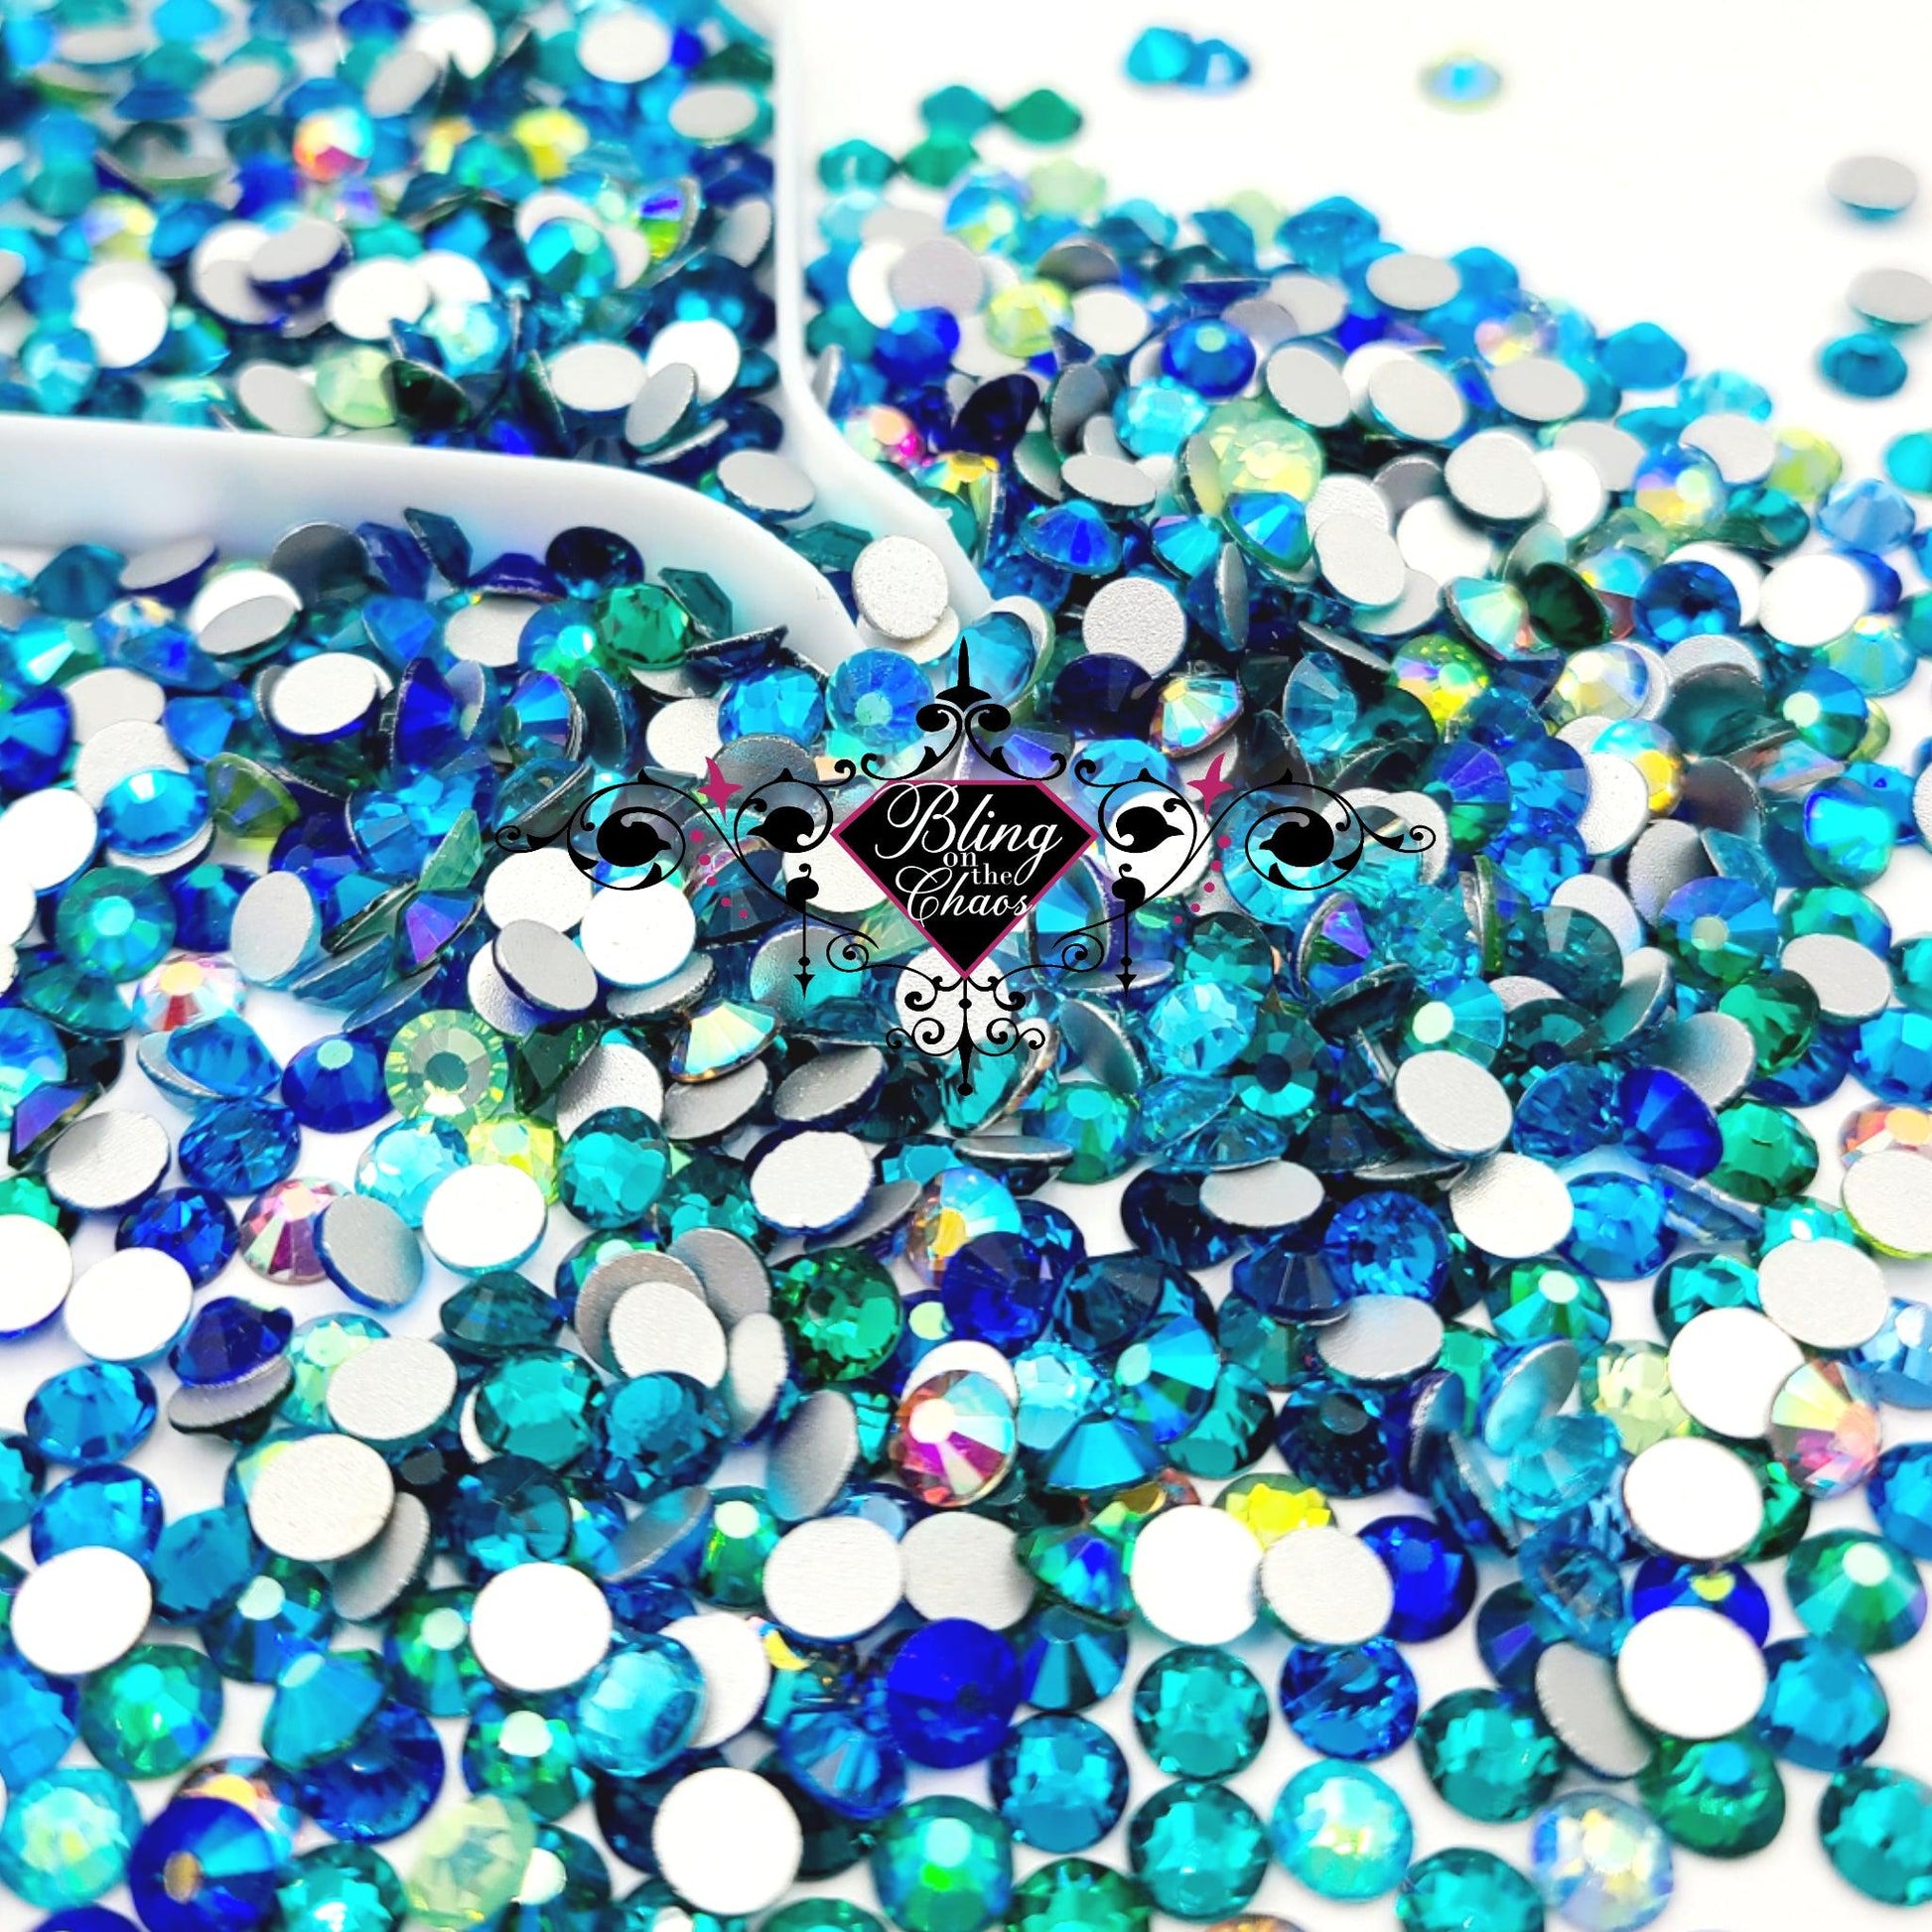 High Tide Honeycomb Bling Set Specialty Mix-Glass Rhinestones-Bling on the Chaos